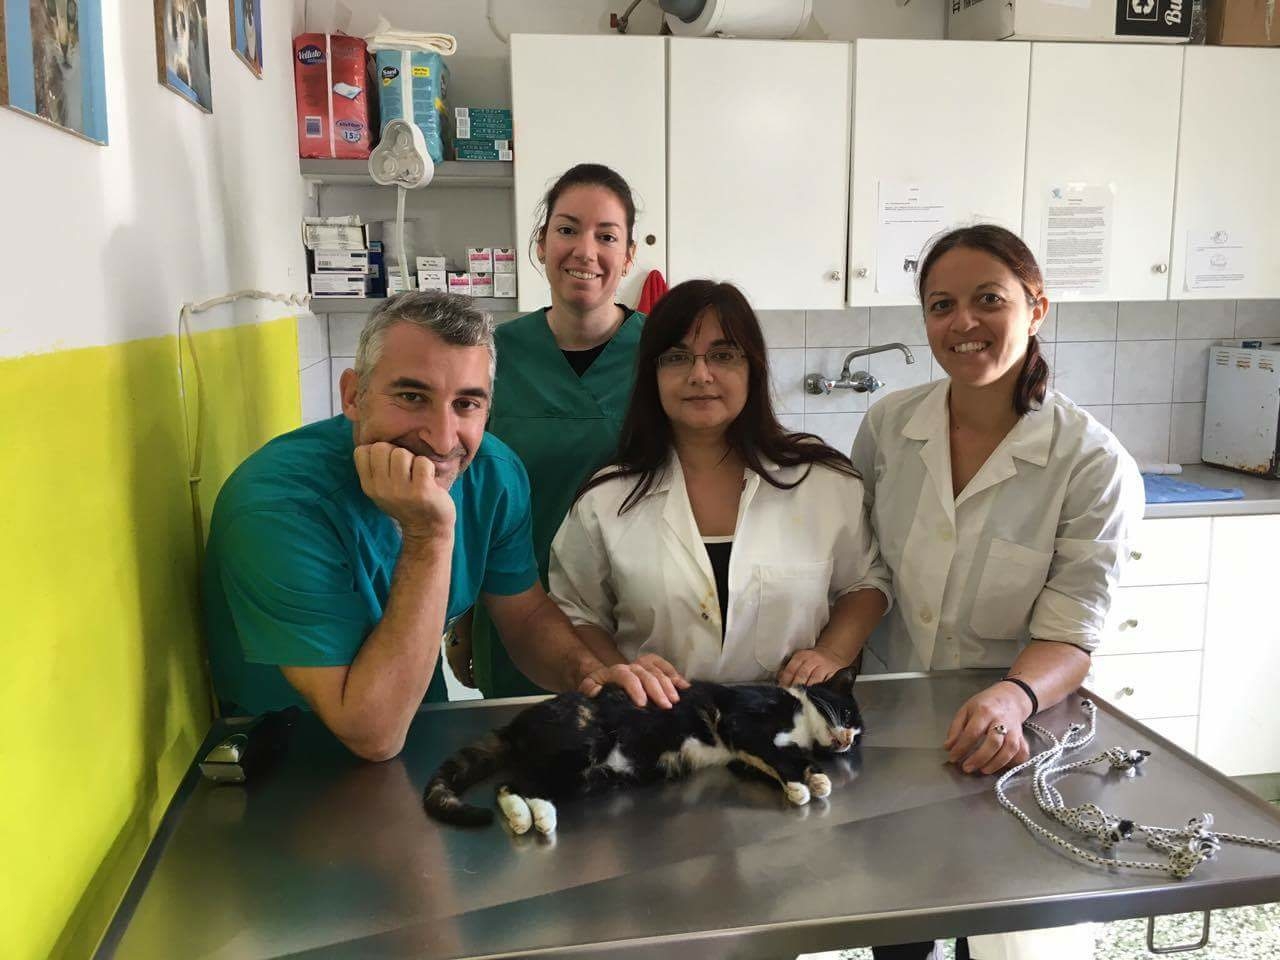   Dr. Manolis Vorisis, Dr. Andrianna Papadimitropoulou, our volunteer, Hariklia Psaki, who helped in the surgeries and in the preparation for the neutering and Litsa Passari, our coordinator  